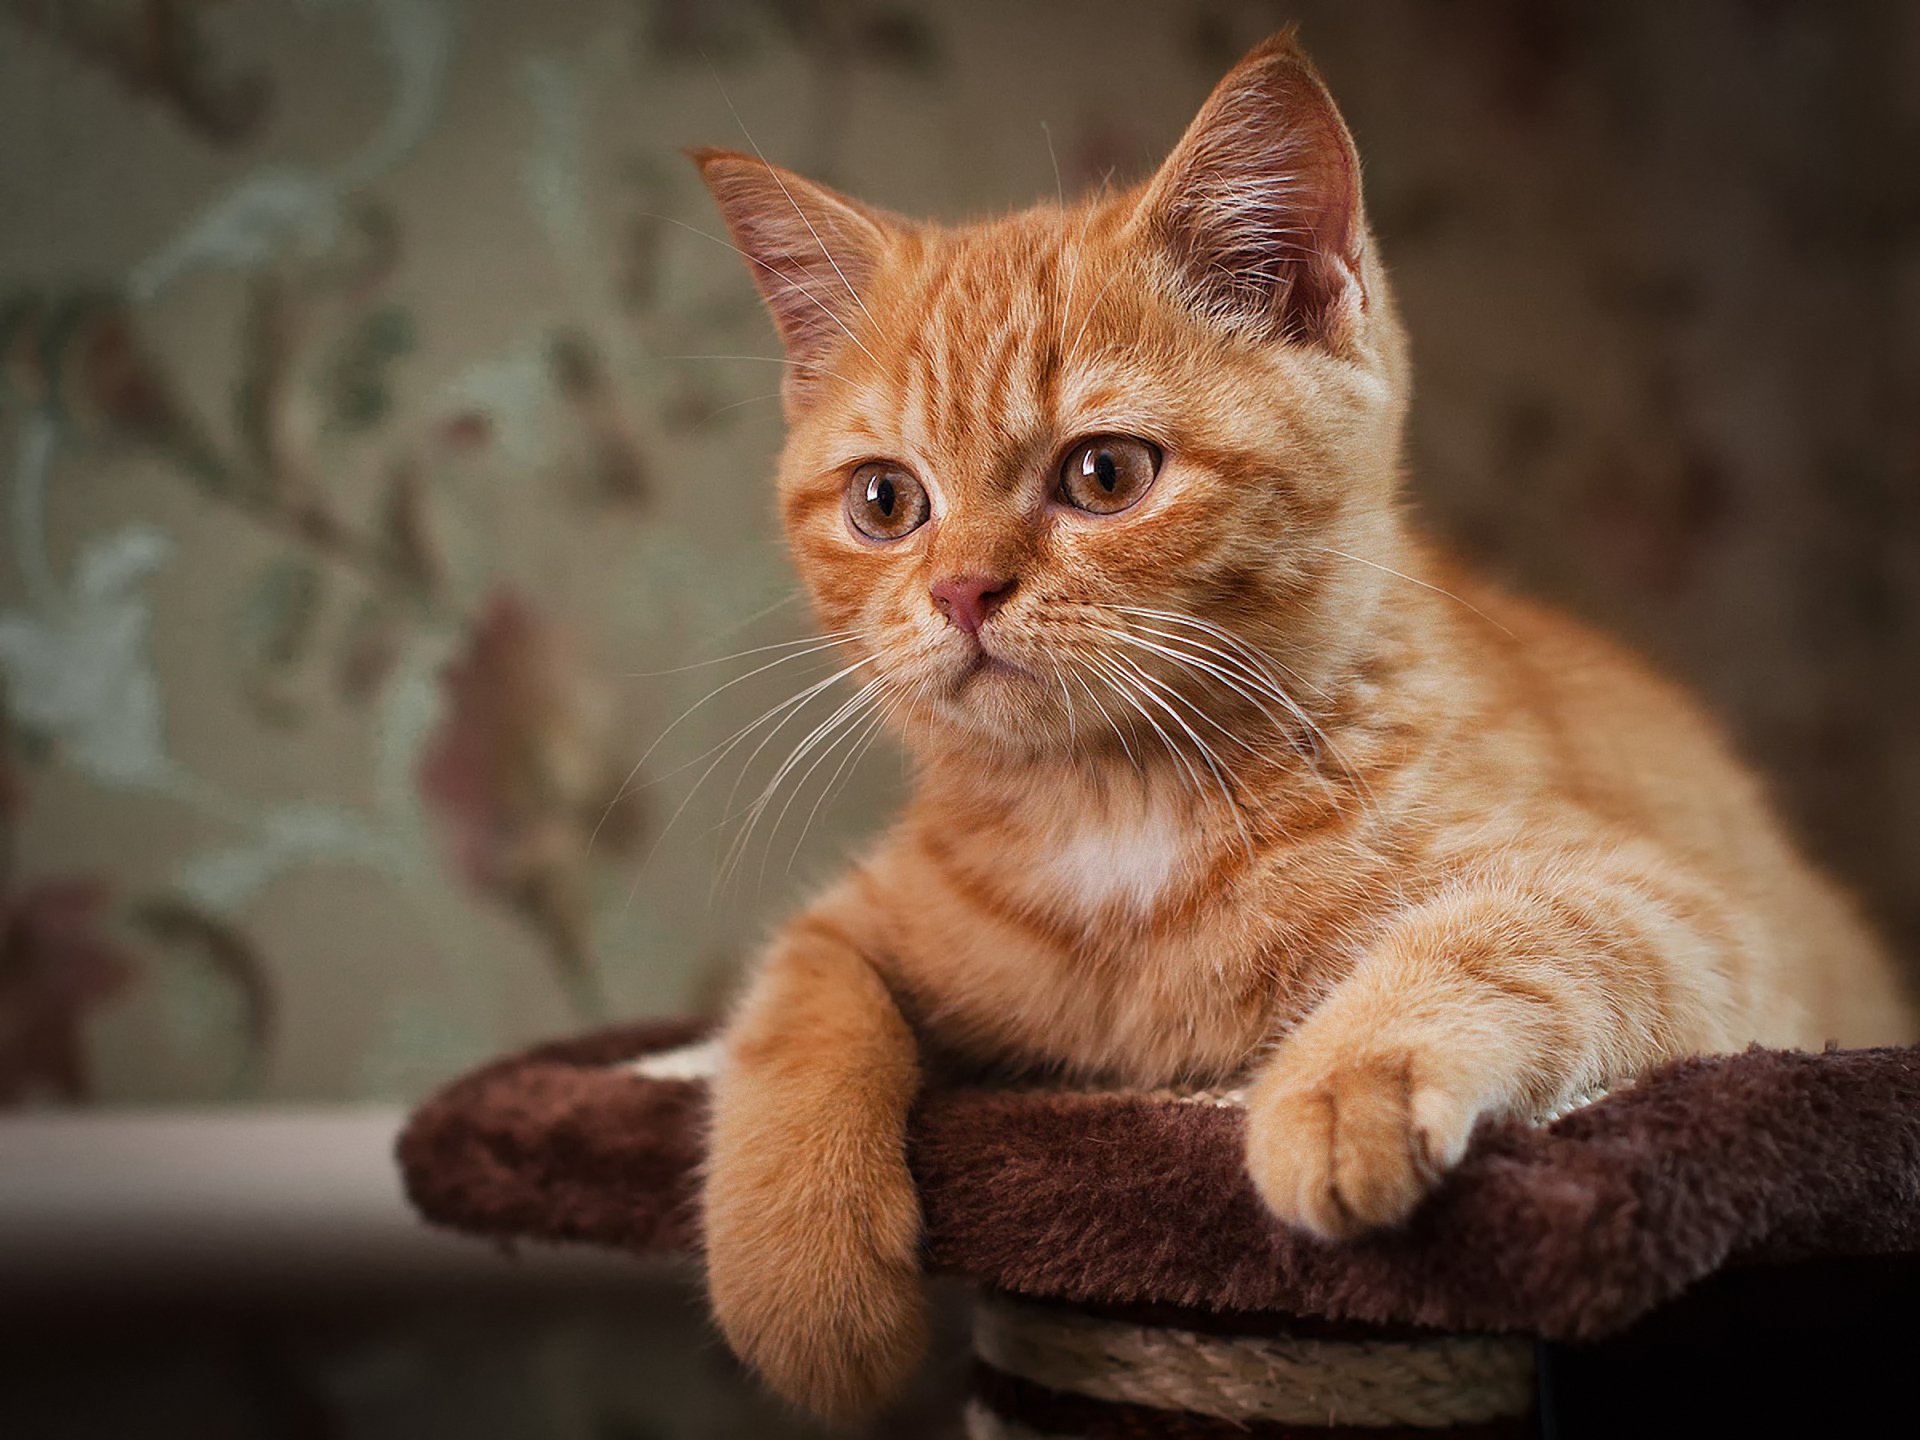 Ginger Kitten Full HD Wallpaper and Background Image | 1920x1440 | ID:323254